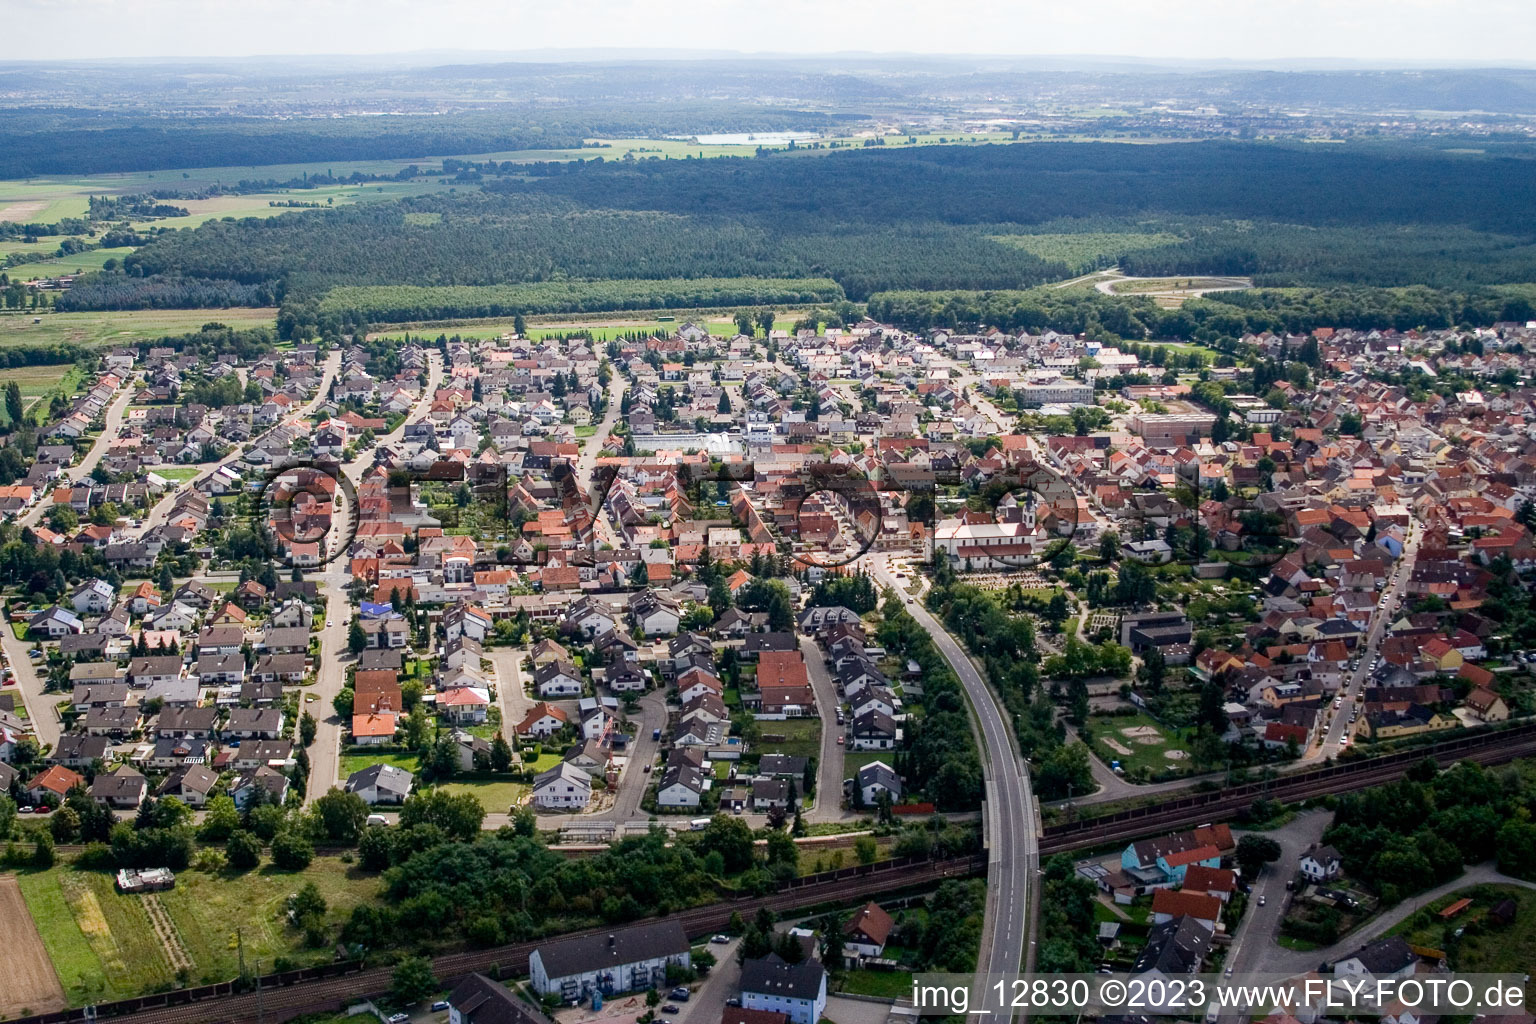 District Neudorf in Graben-Neudorf in the state Baden-Wuerttemberg, Germany from above